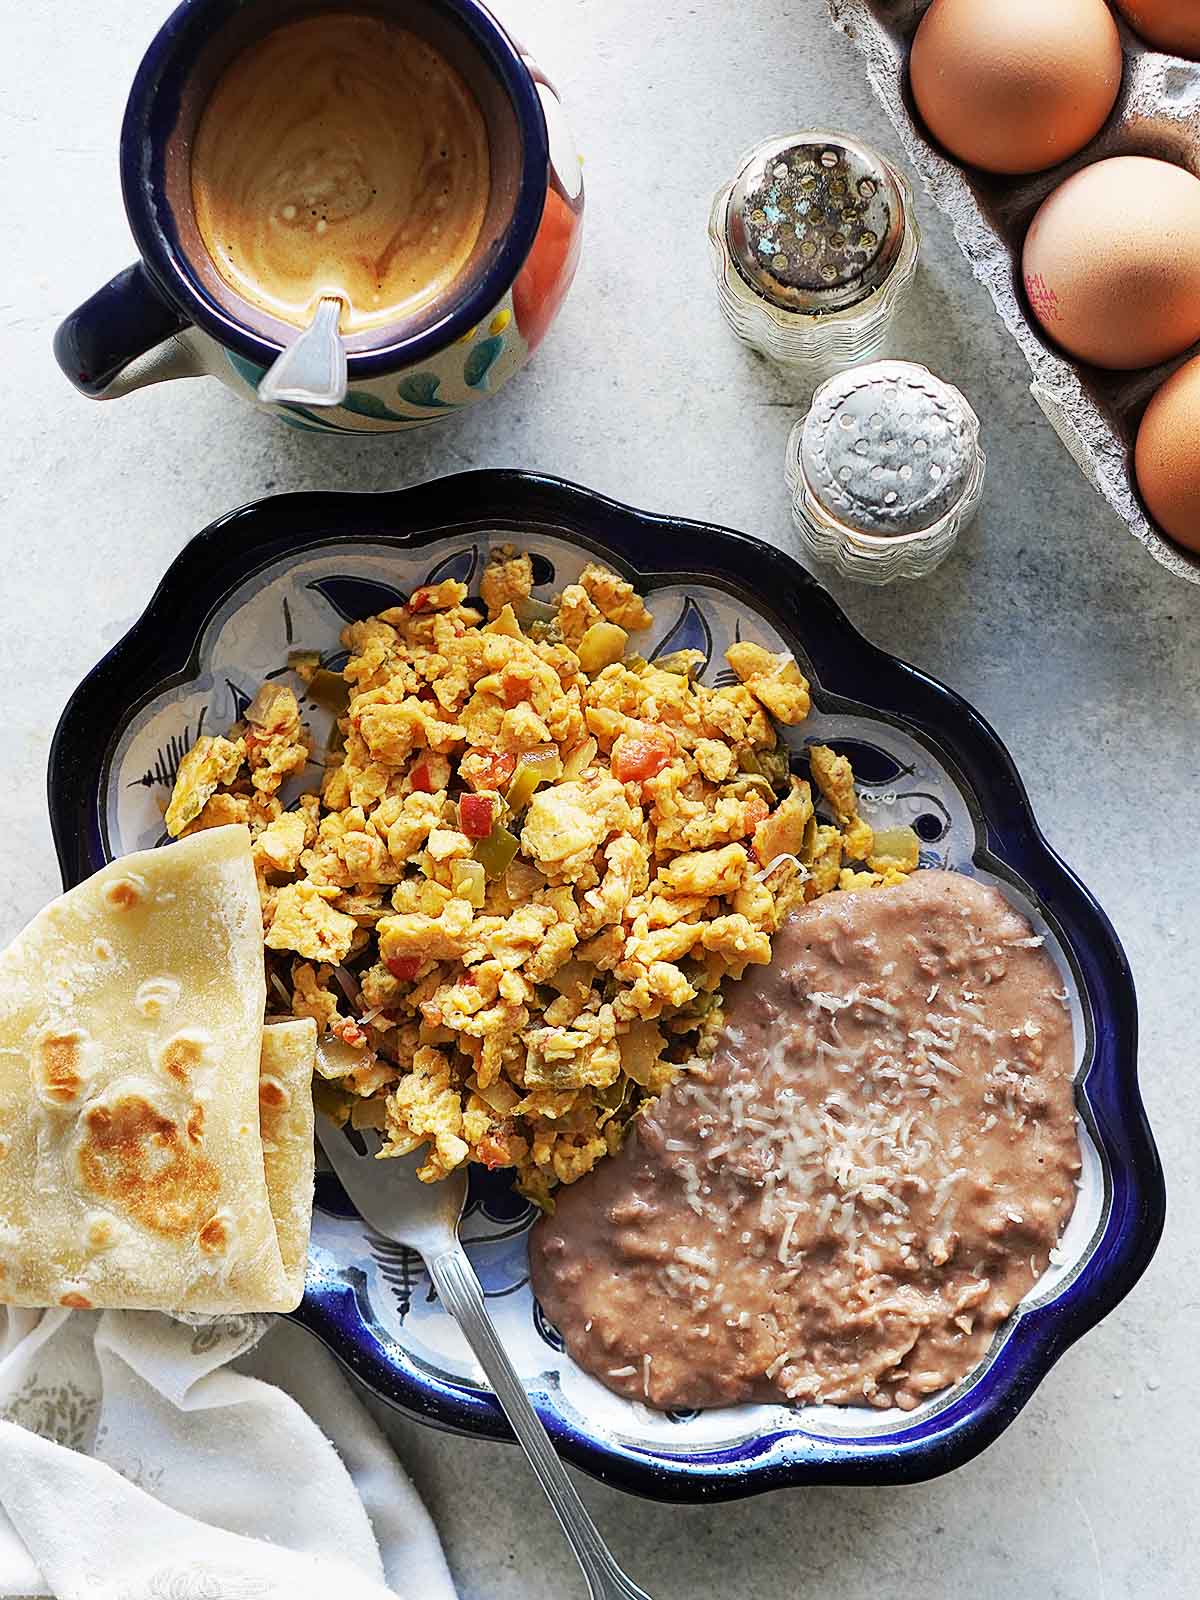 Huevos a la mexicana on a blue plate with refried beans and a tortilla on the side.